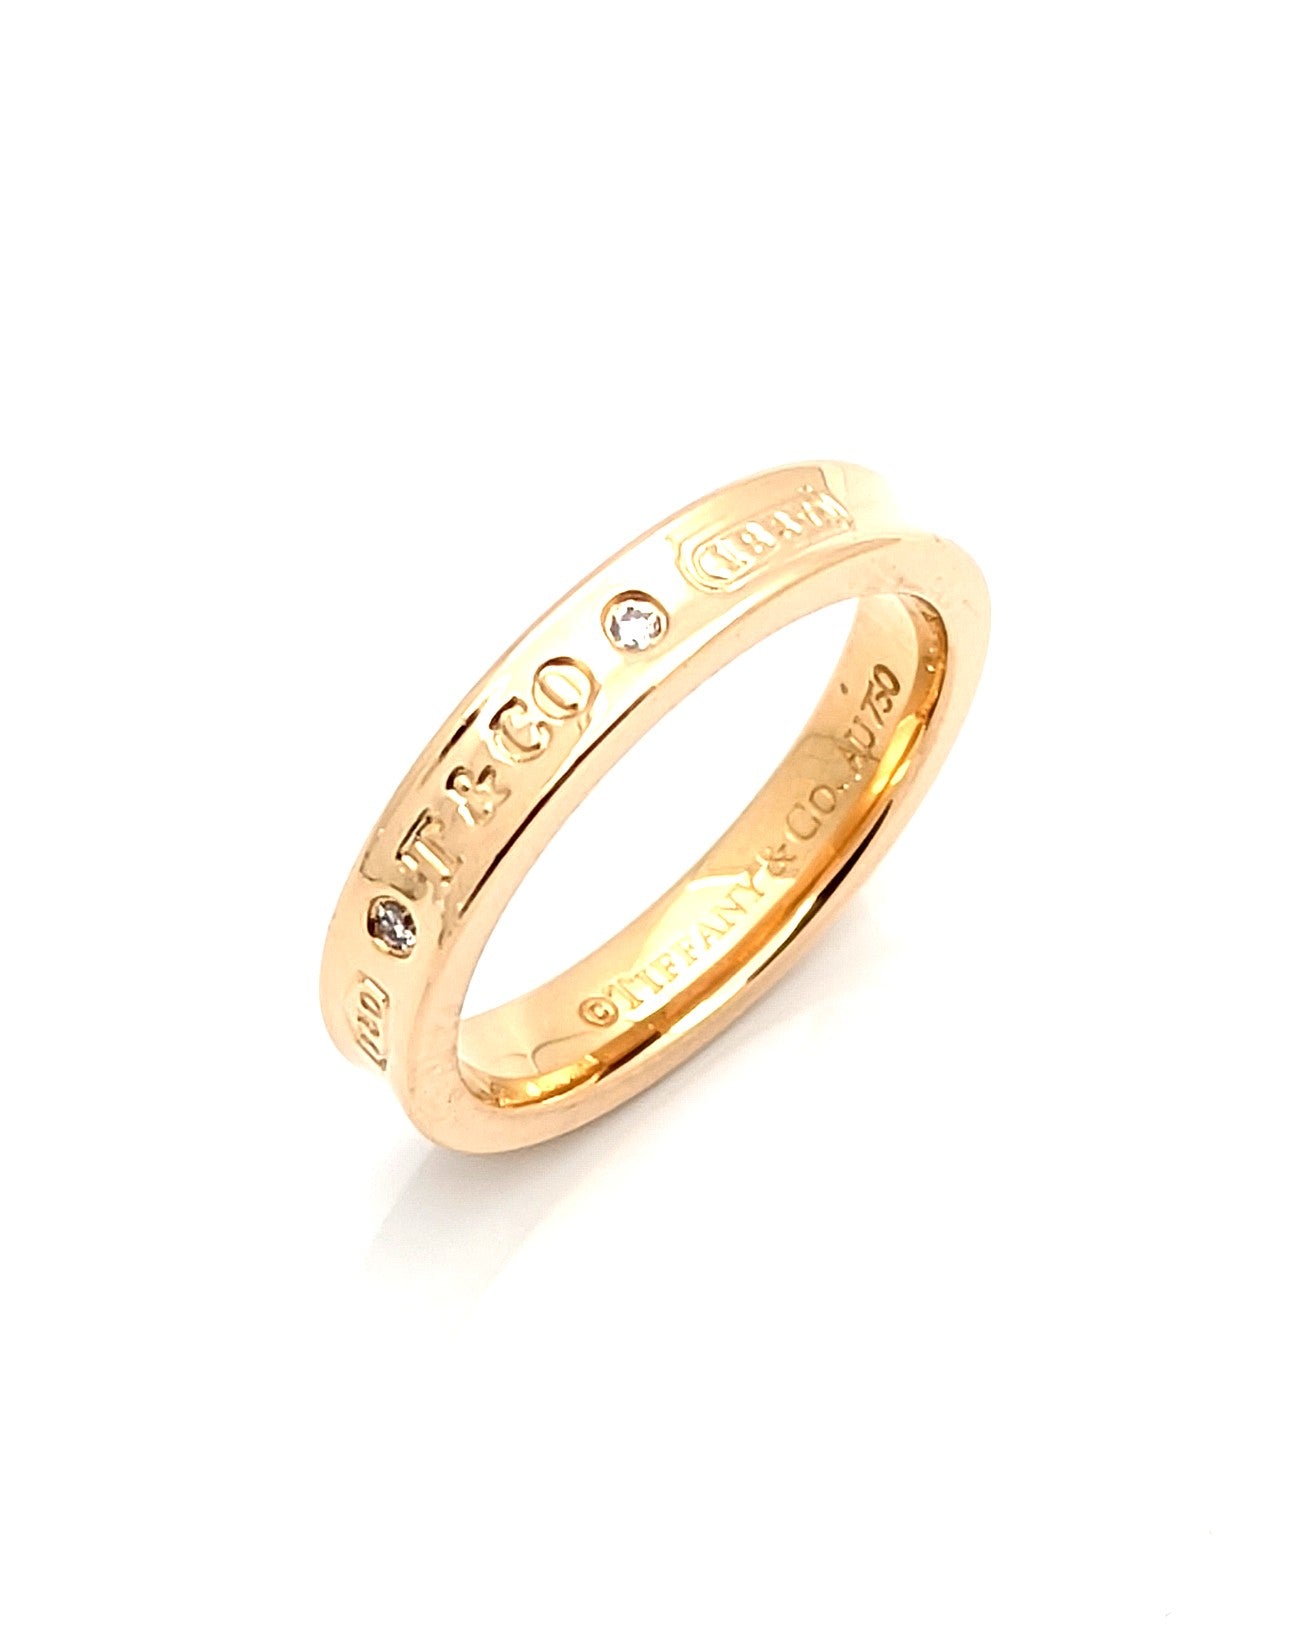 Tiffany & Co.® band ring in 18k gold with diamonds, 4 mm.